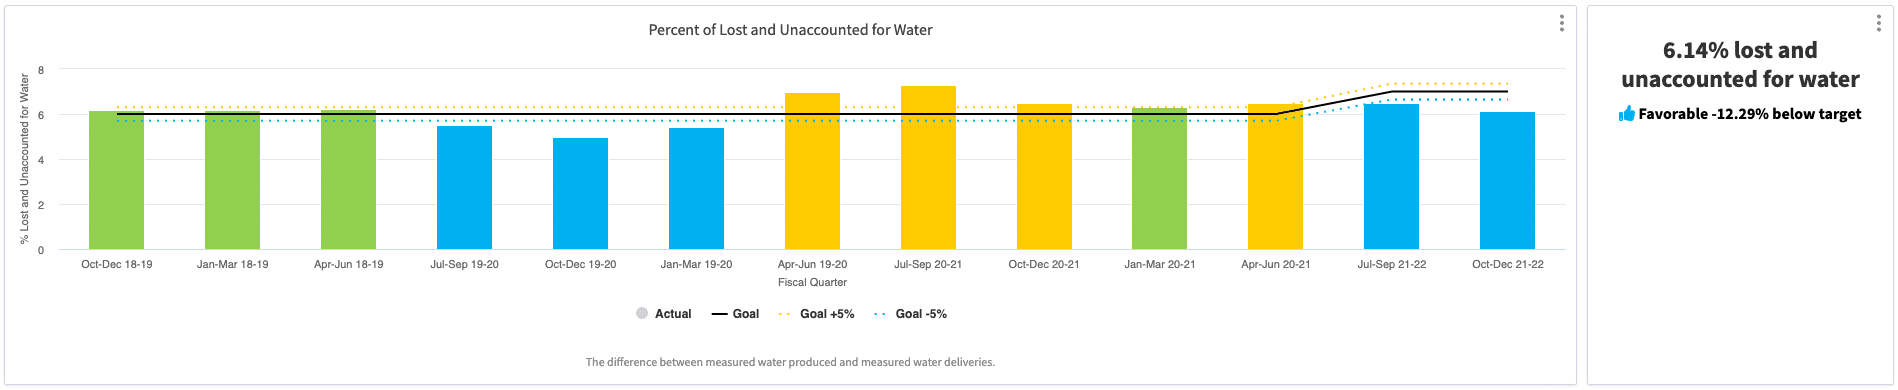 City of Scottsdale's water loss public works performance measure chart